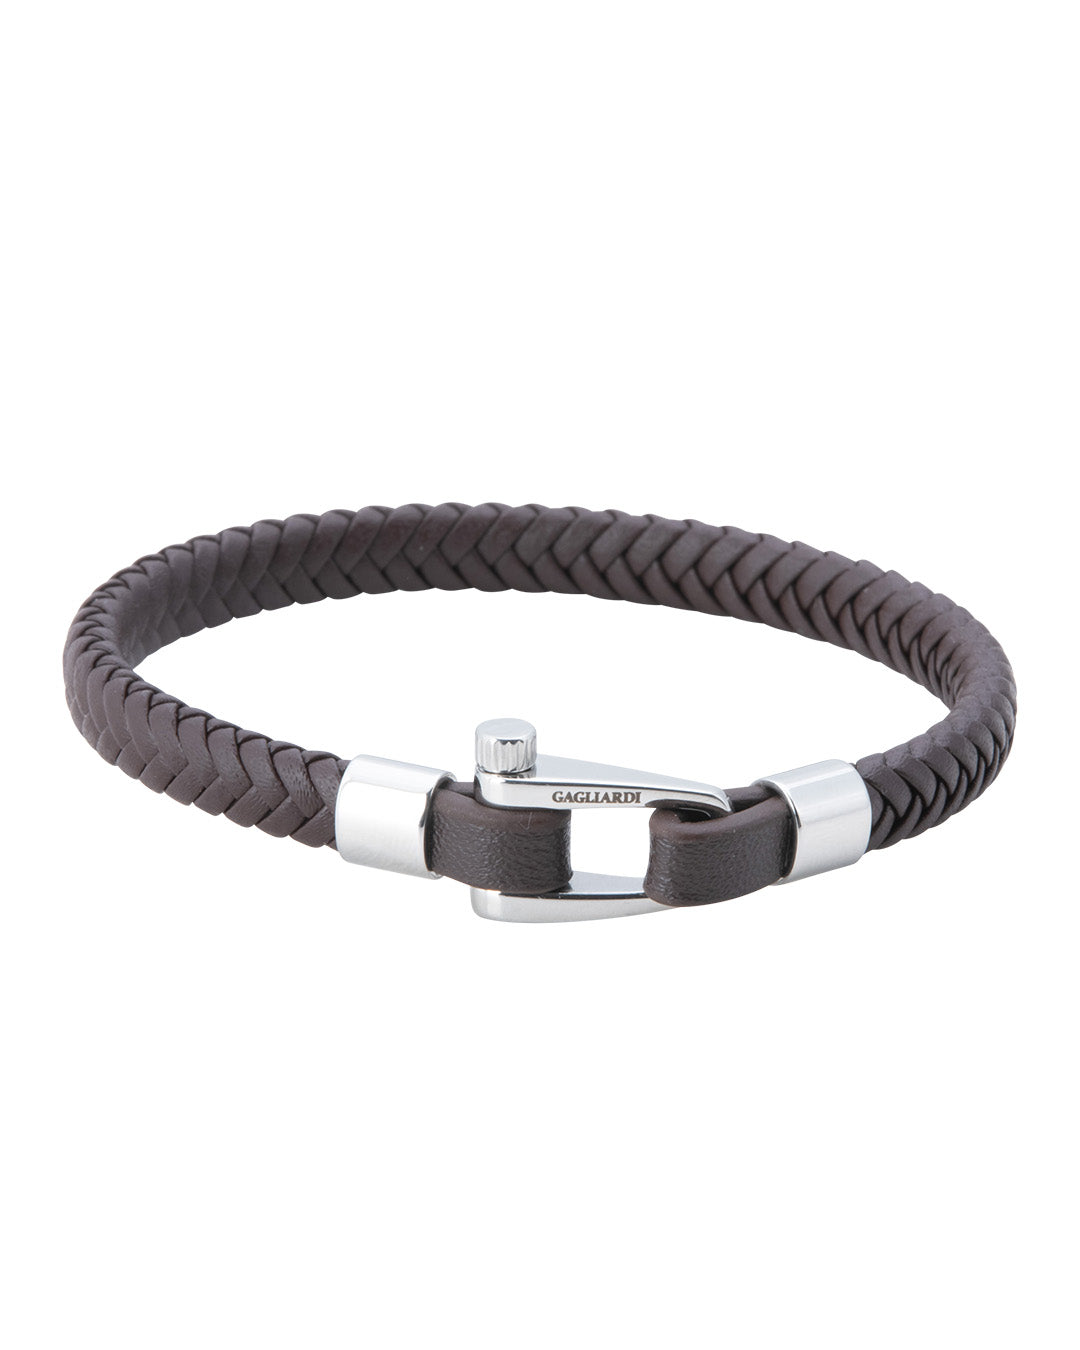 Brown Braided Leather Bracelet With Polished Steel Screw Clasp